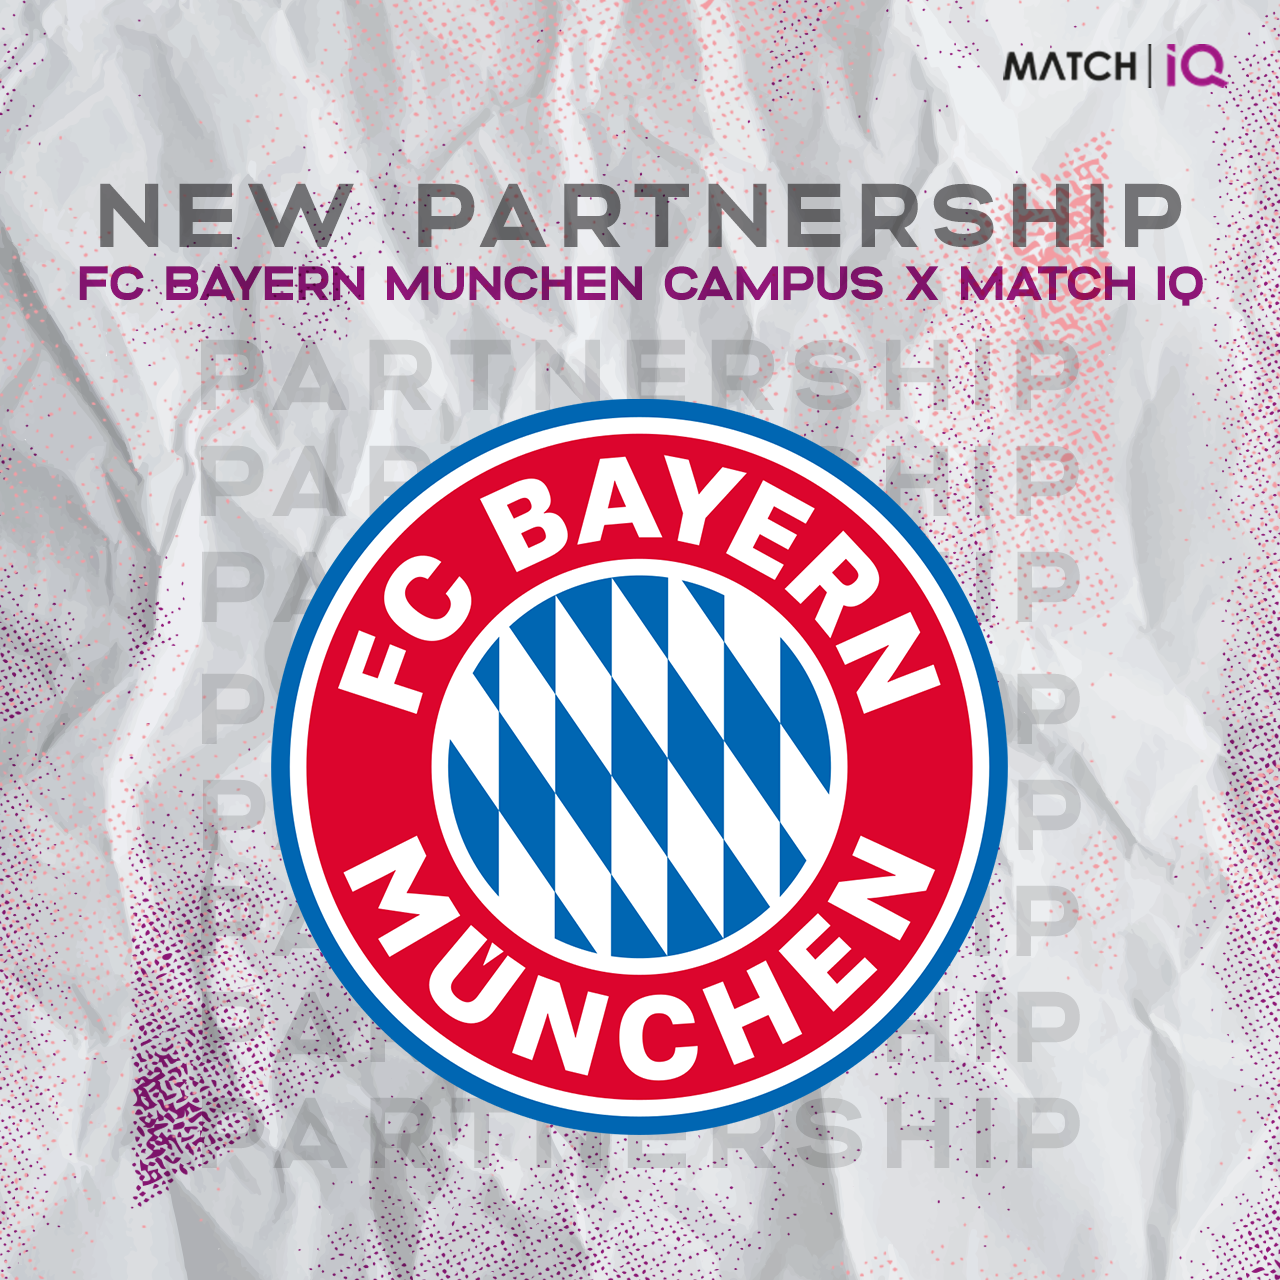 Match IQ and FC Bayern München Campus sign cooperation agreement!